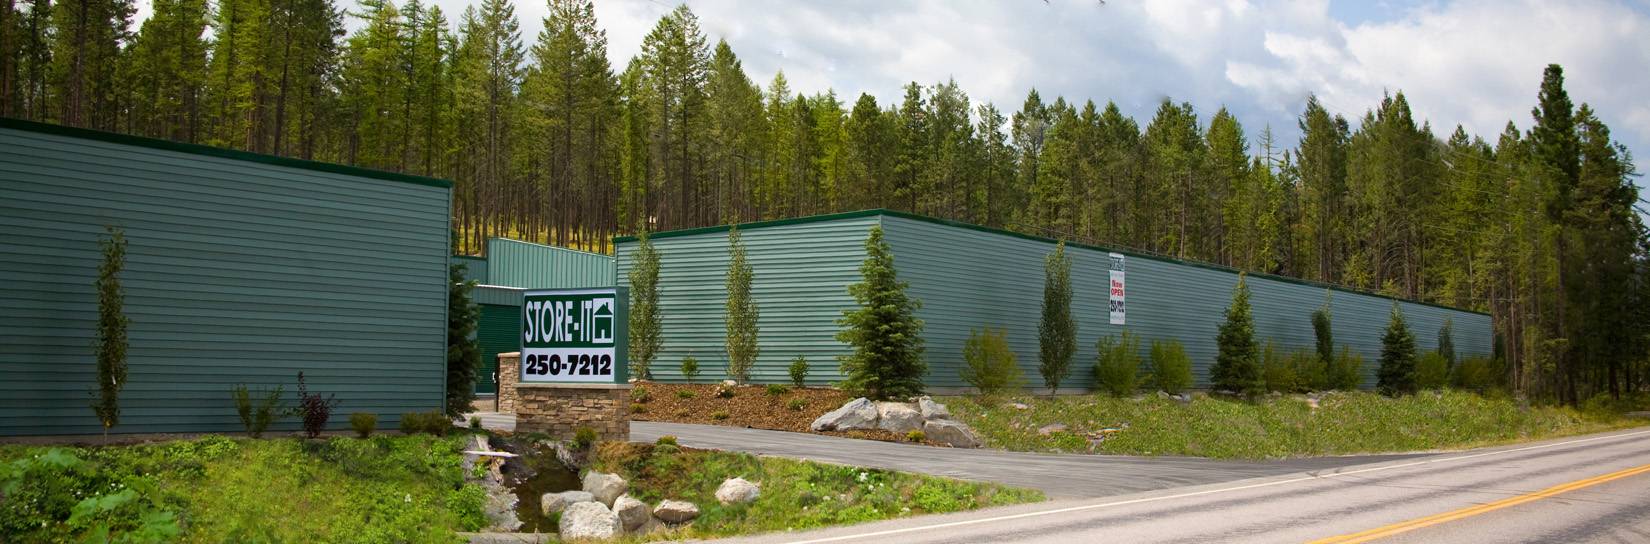 STORE-IT self storage in Somers, MT